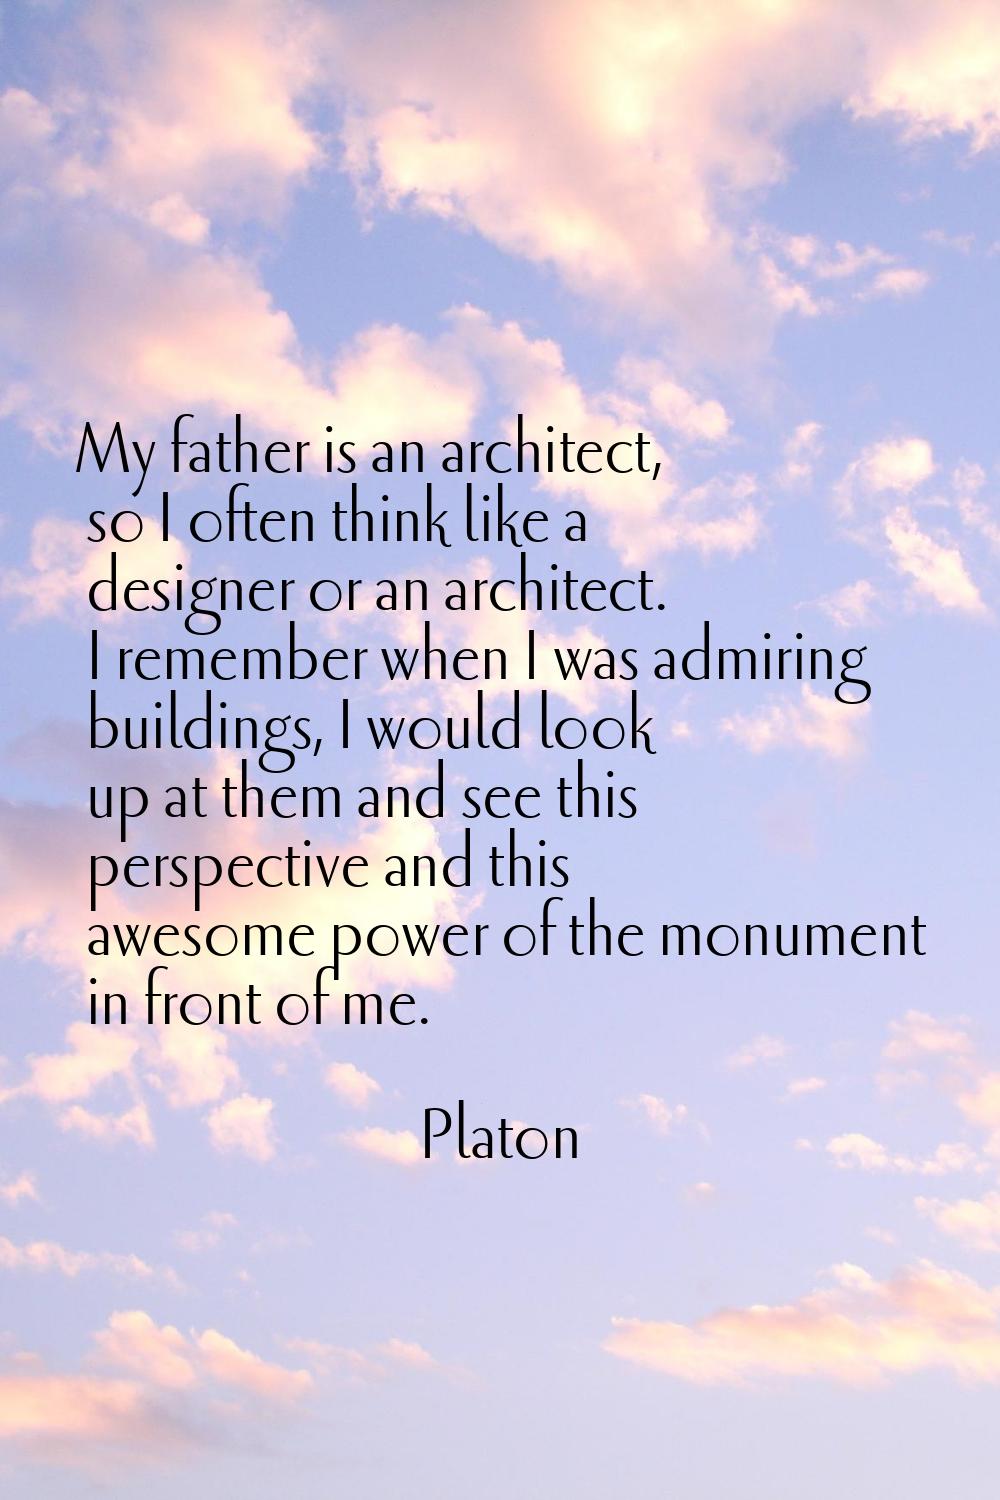 My father is an architect, so I often think like a designer or an architect. I remember when I was 